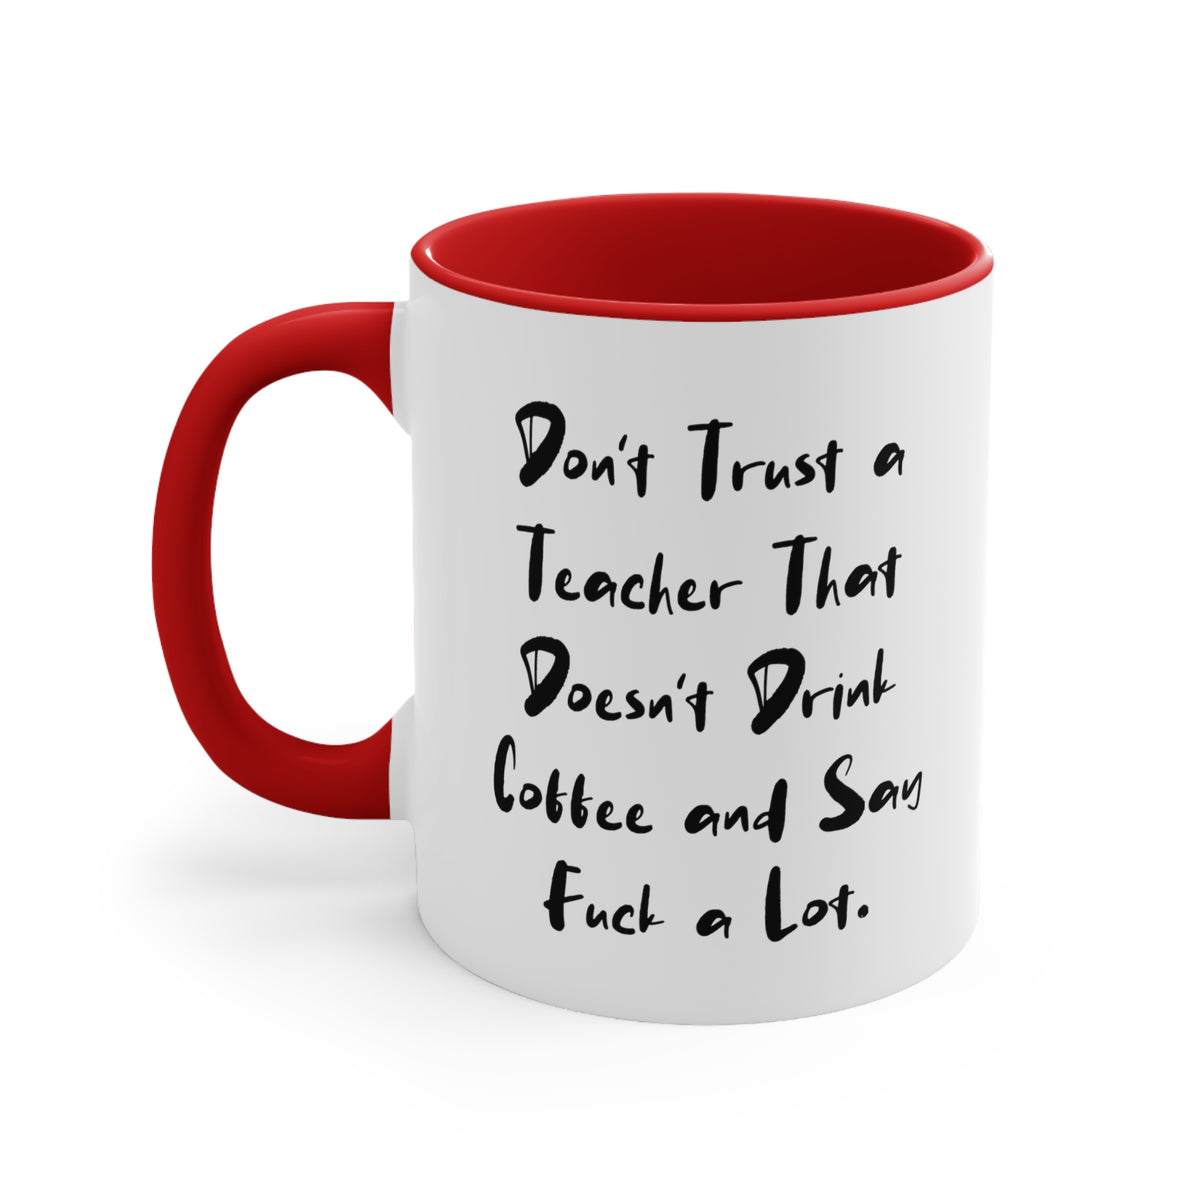 Don't Trust a Teacher That Doesn't Drink Coffee and Say Fuck a Lot. Teacher Two Tone 11oz Mug, Epic Teacher, Cup For Coworkers